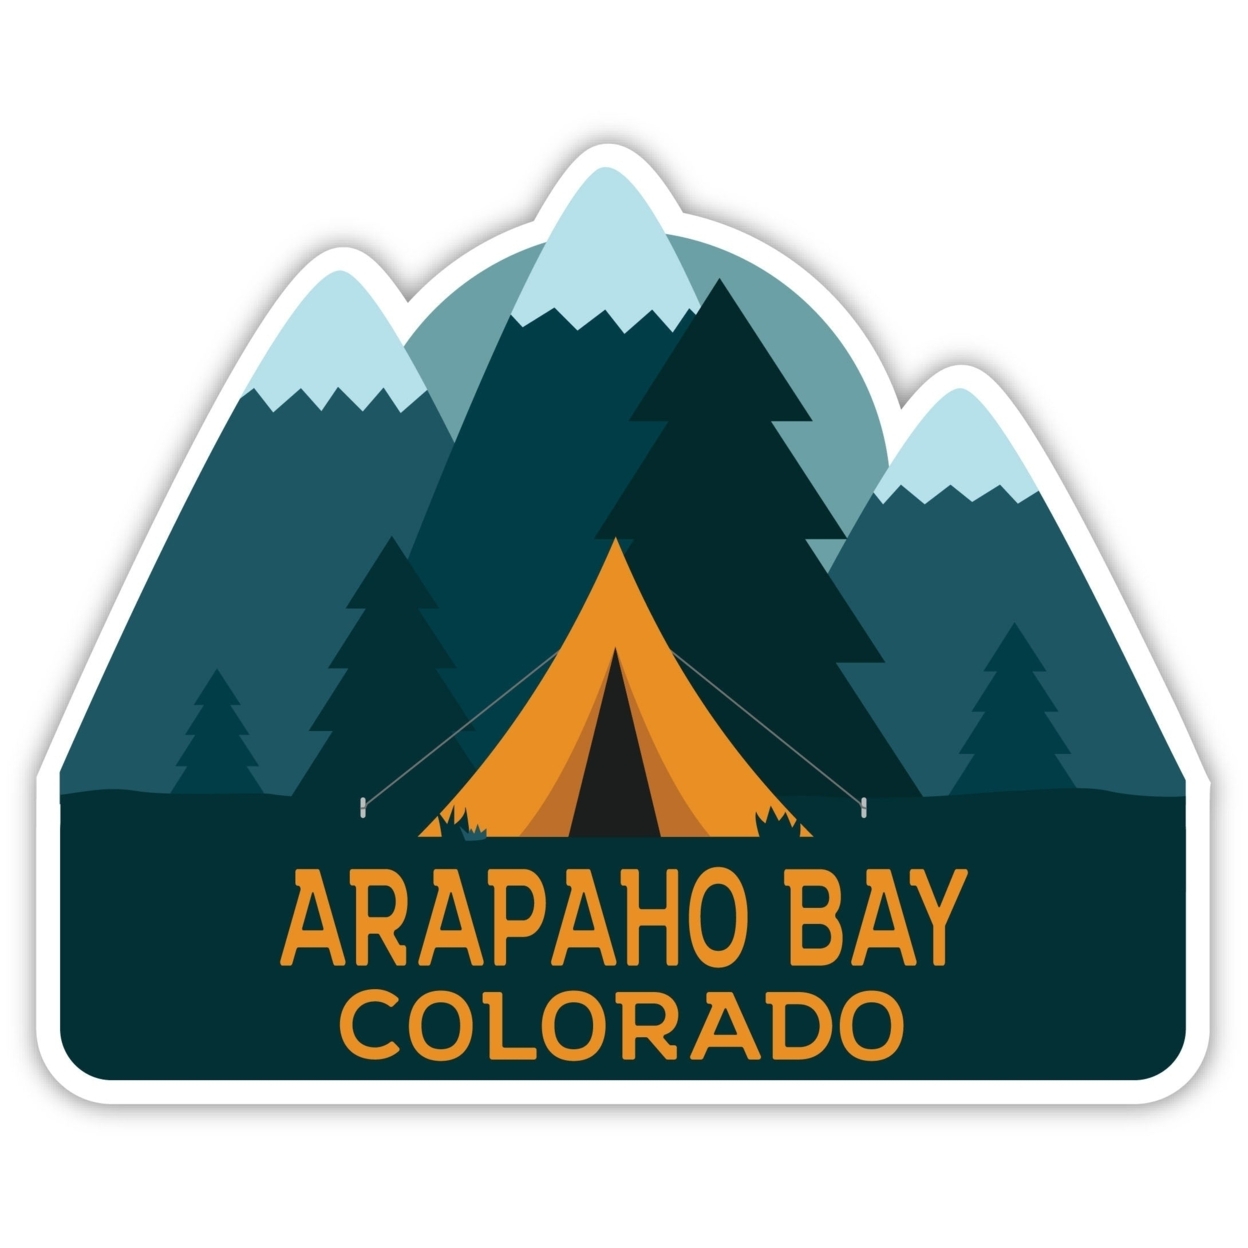 Arapaho Bay Colorado Souvenir Decorative Stickers (Choose Theme And Size) - 4-Pack, 10-Inch, Tent